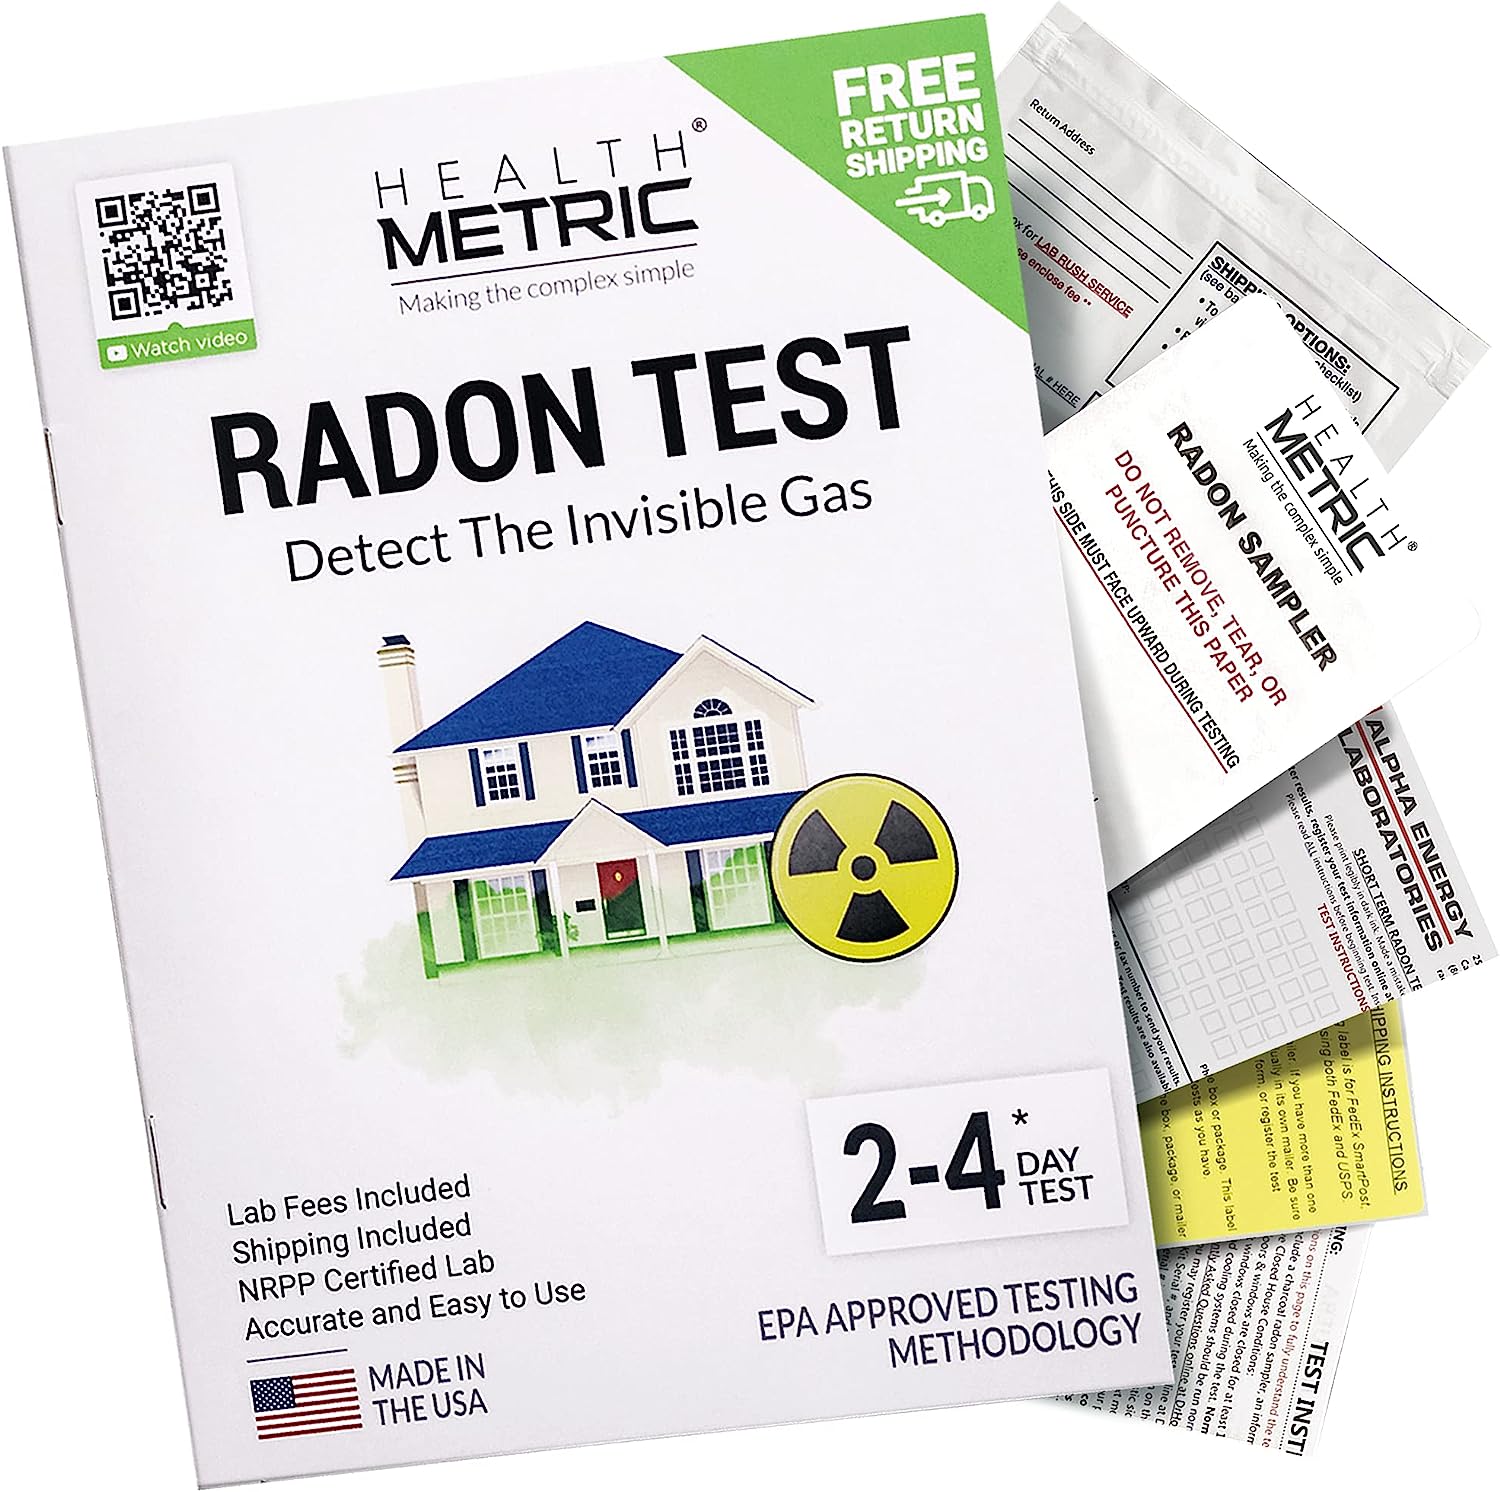 Radon Test Kit for Home - Shipping & Lab Fees Included [...]